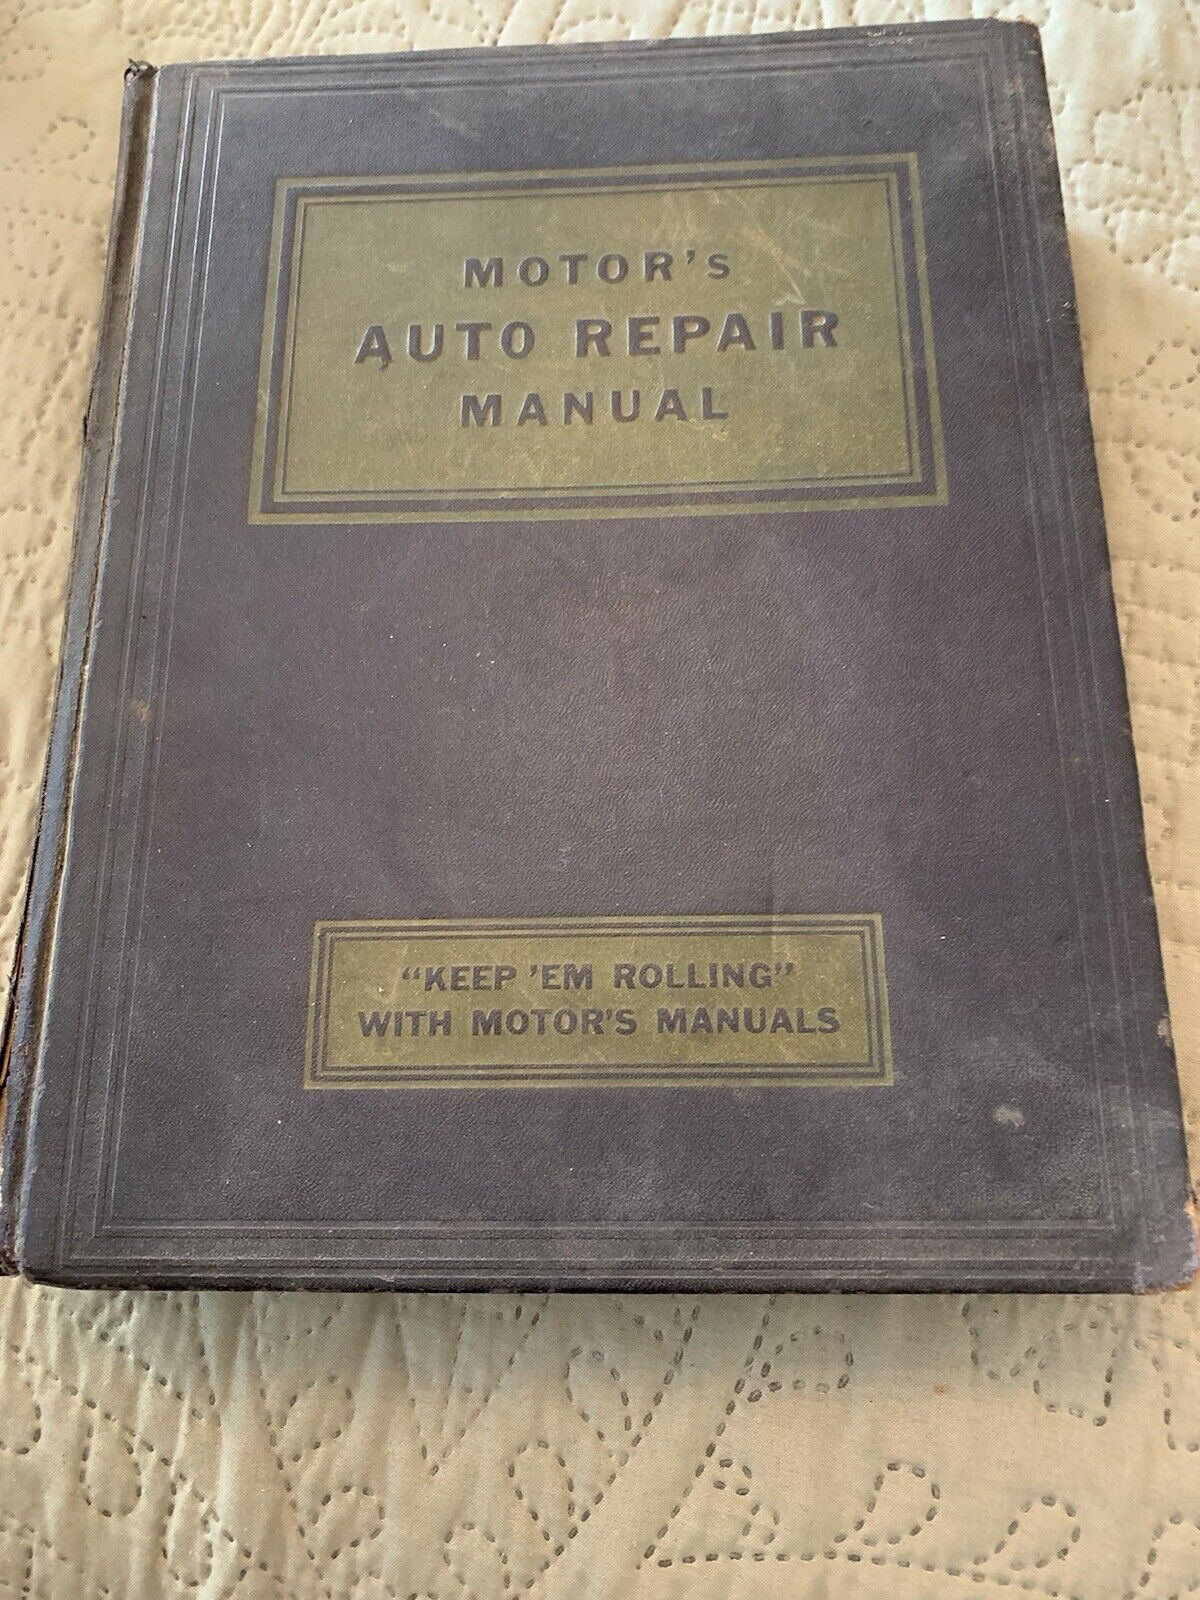 Vintage/Antique Motor’s Auto Repair Manual For Vehicles 1935-1952 Printed 1952